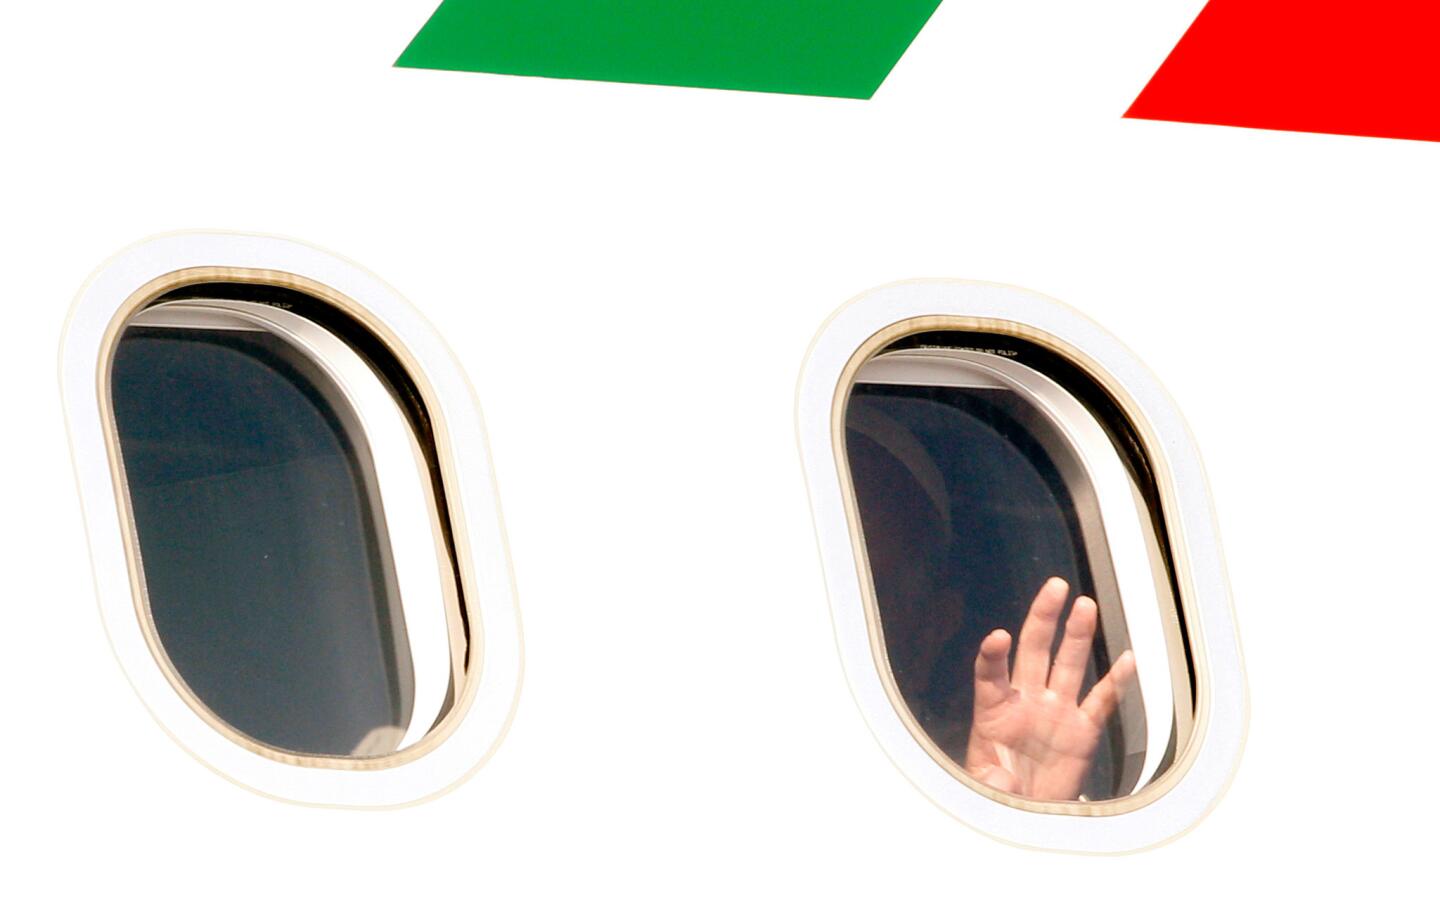 Pope Francis departs